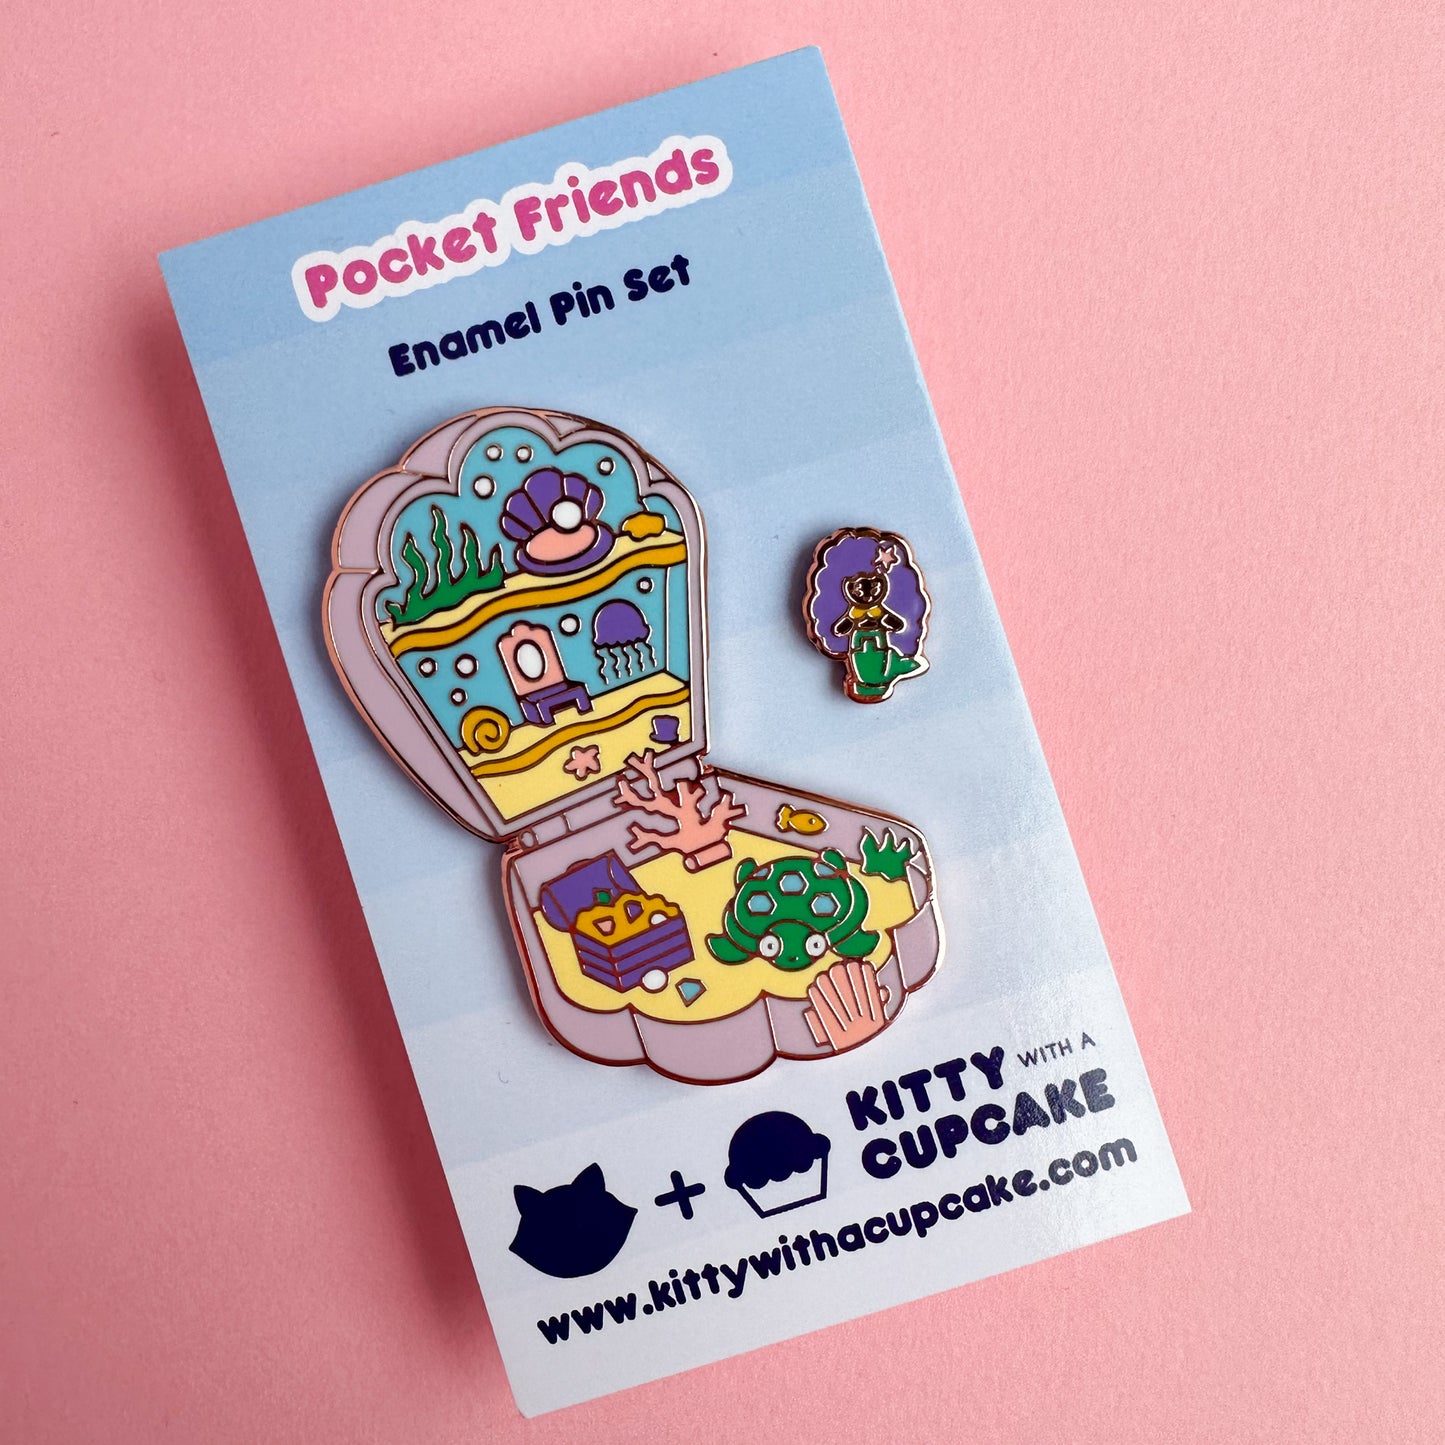 An enamel pin in the shape of a Polly Pocket compact shell with a mermaid mini pin. The shell compact is the mermaid's home with a jellyfish, coral, treasure chest, and a turtle. The pins are packaged on a blue card that reads "Pocket Friends Enamel Pin Set"